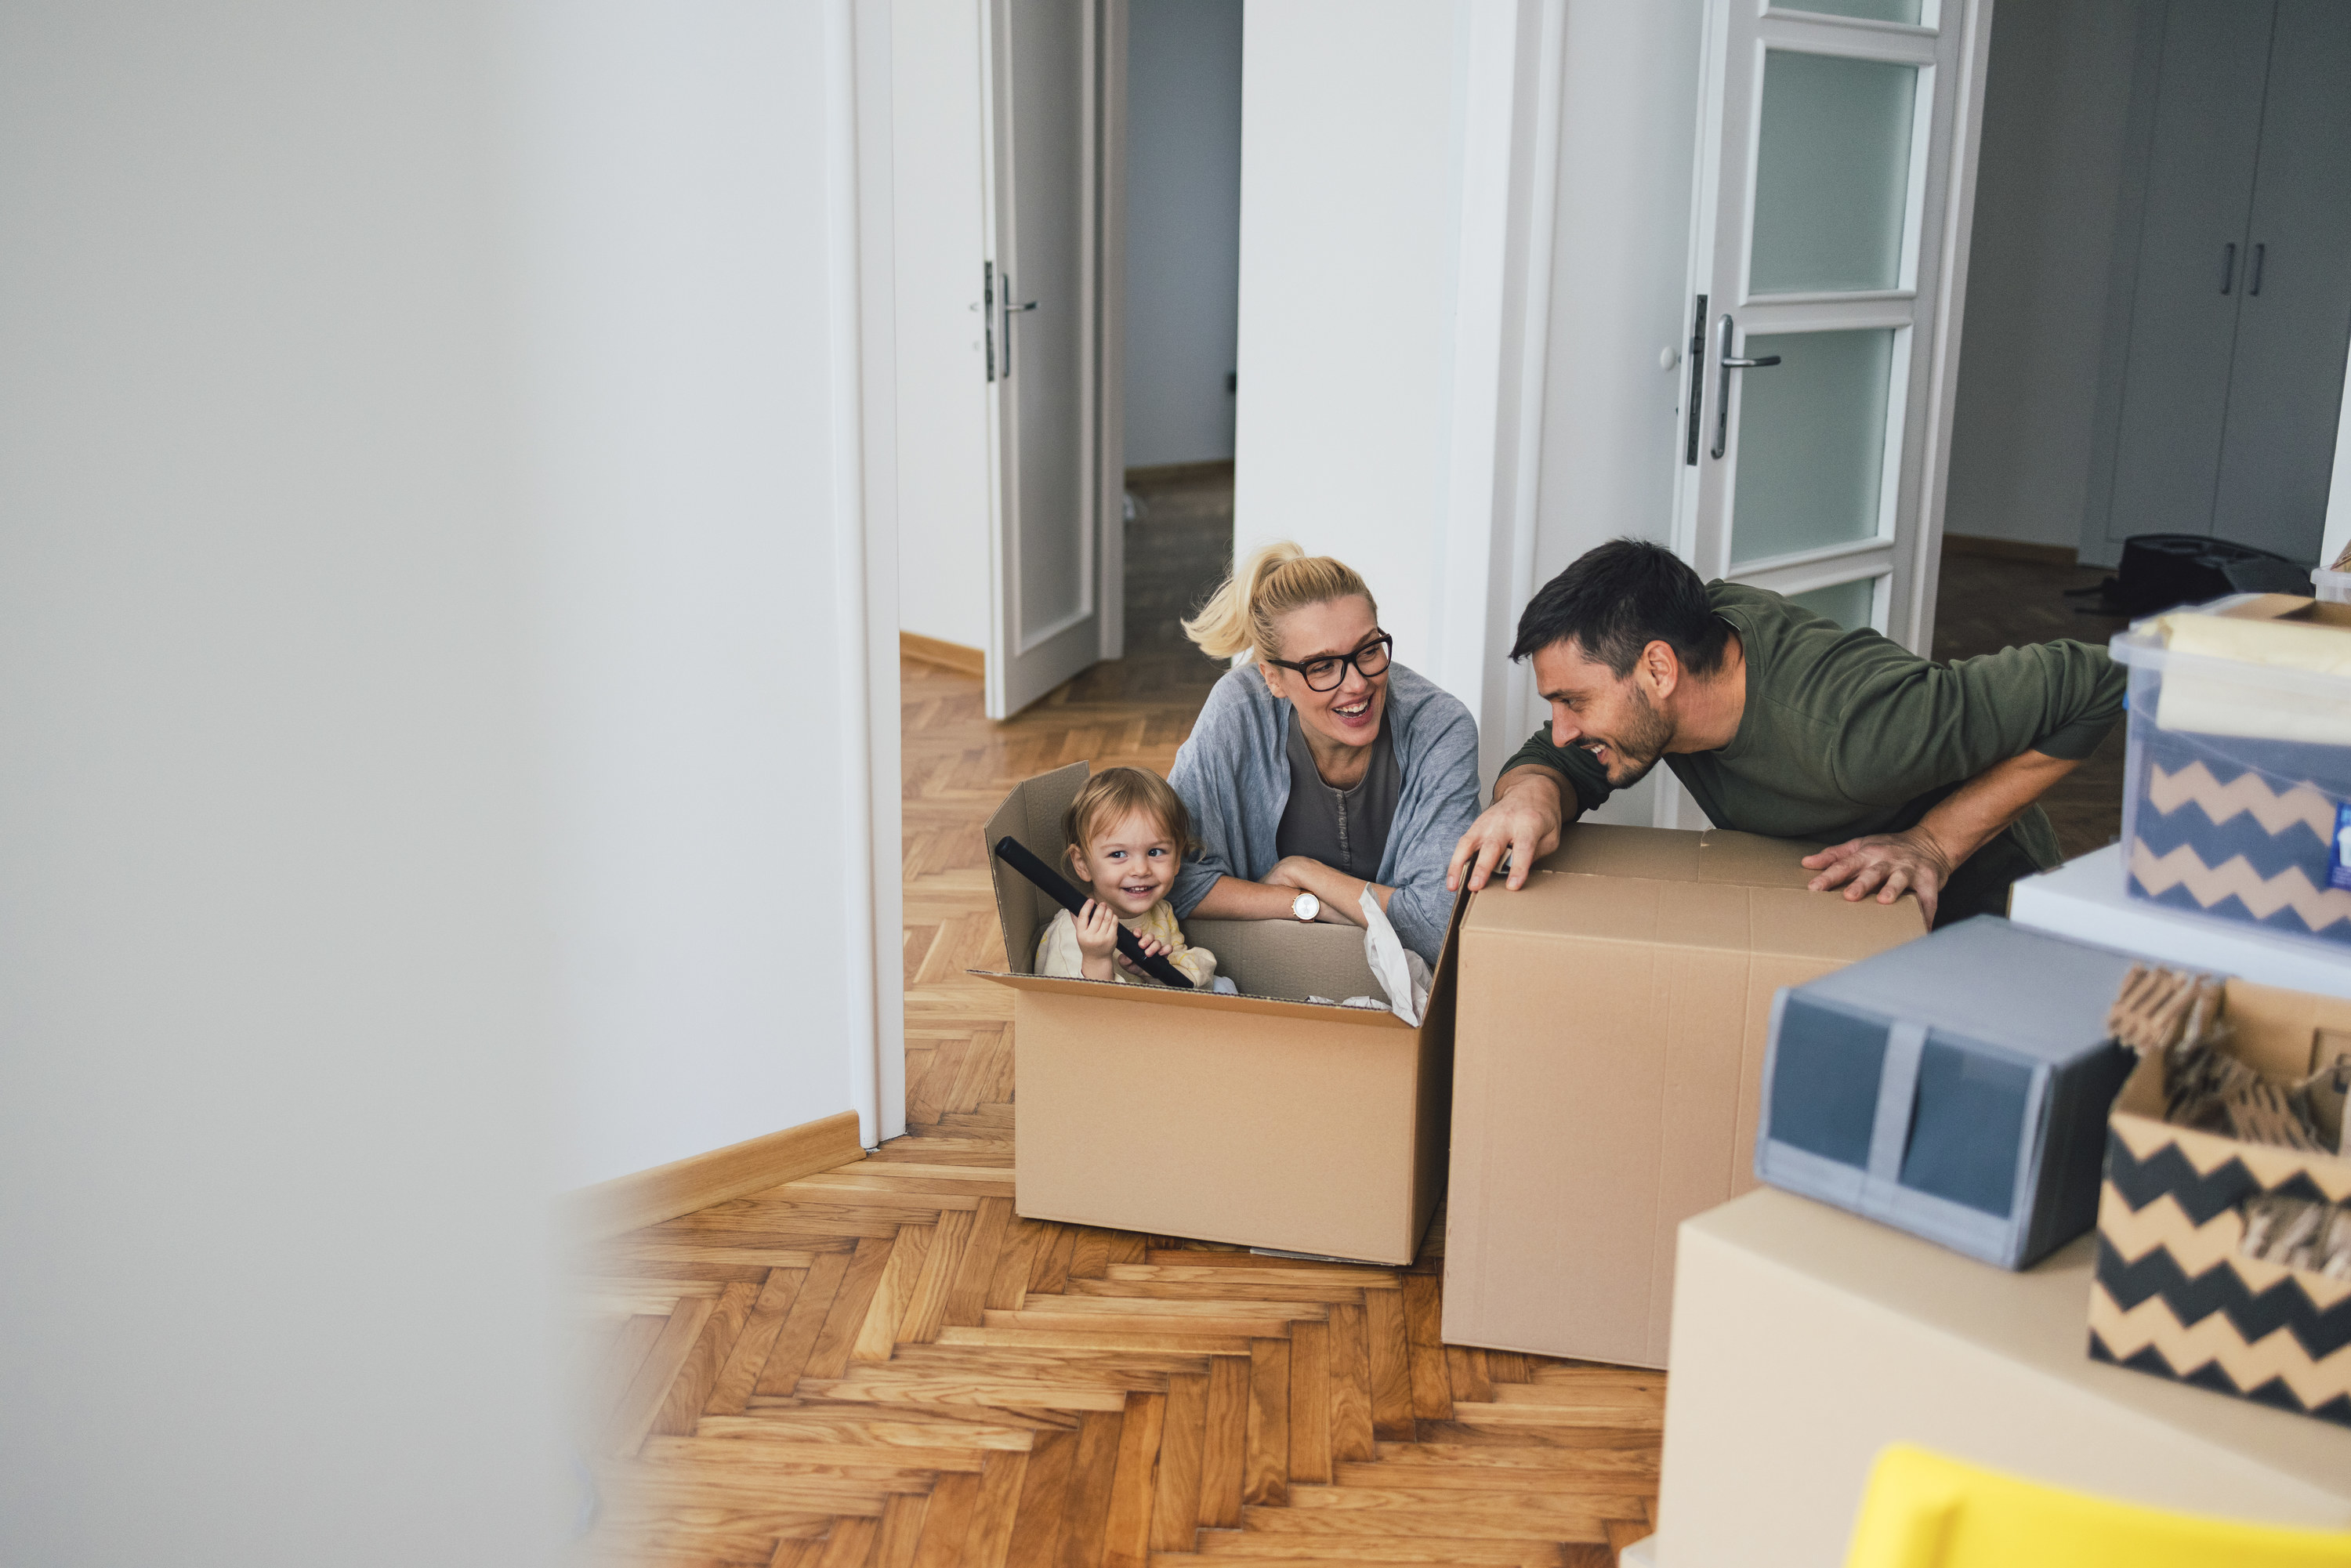 Family of three is moving in or out of a room in an apartment or a house